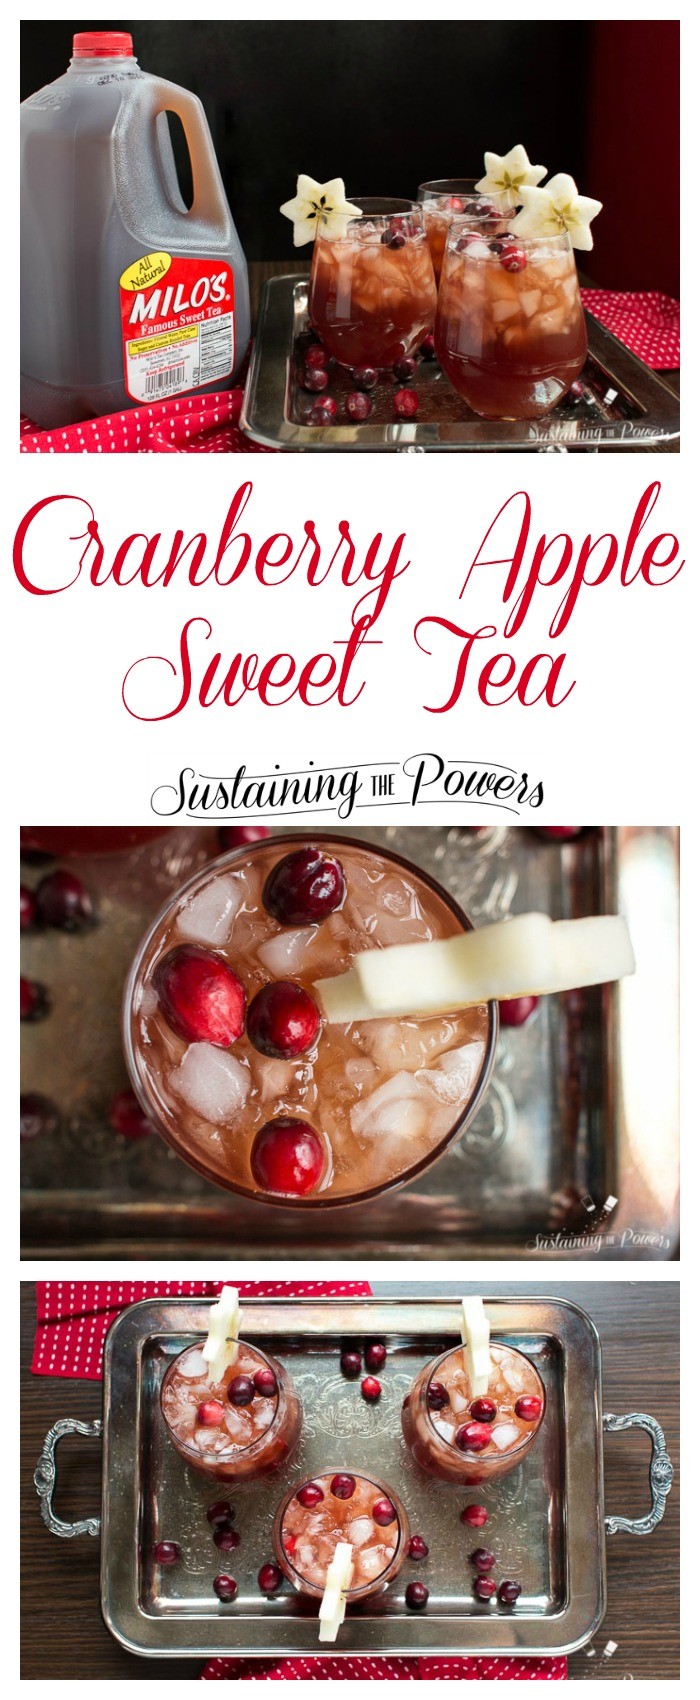 Cranberry Apple Sweet Tea made with @DrinkMilos is perfect to have on hand for your holiday entertaining! #HolidaysWithMilos #DrinkMilos #Pmedia #ad